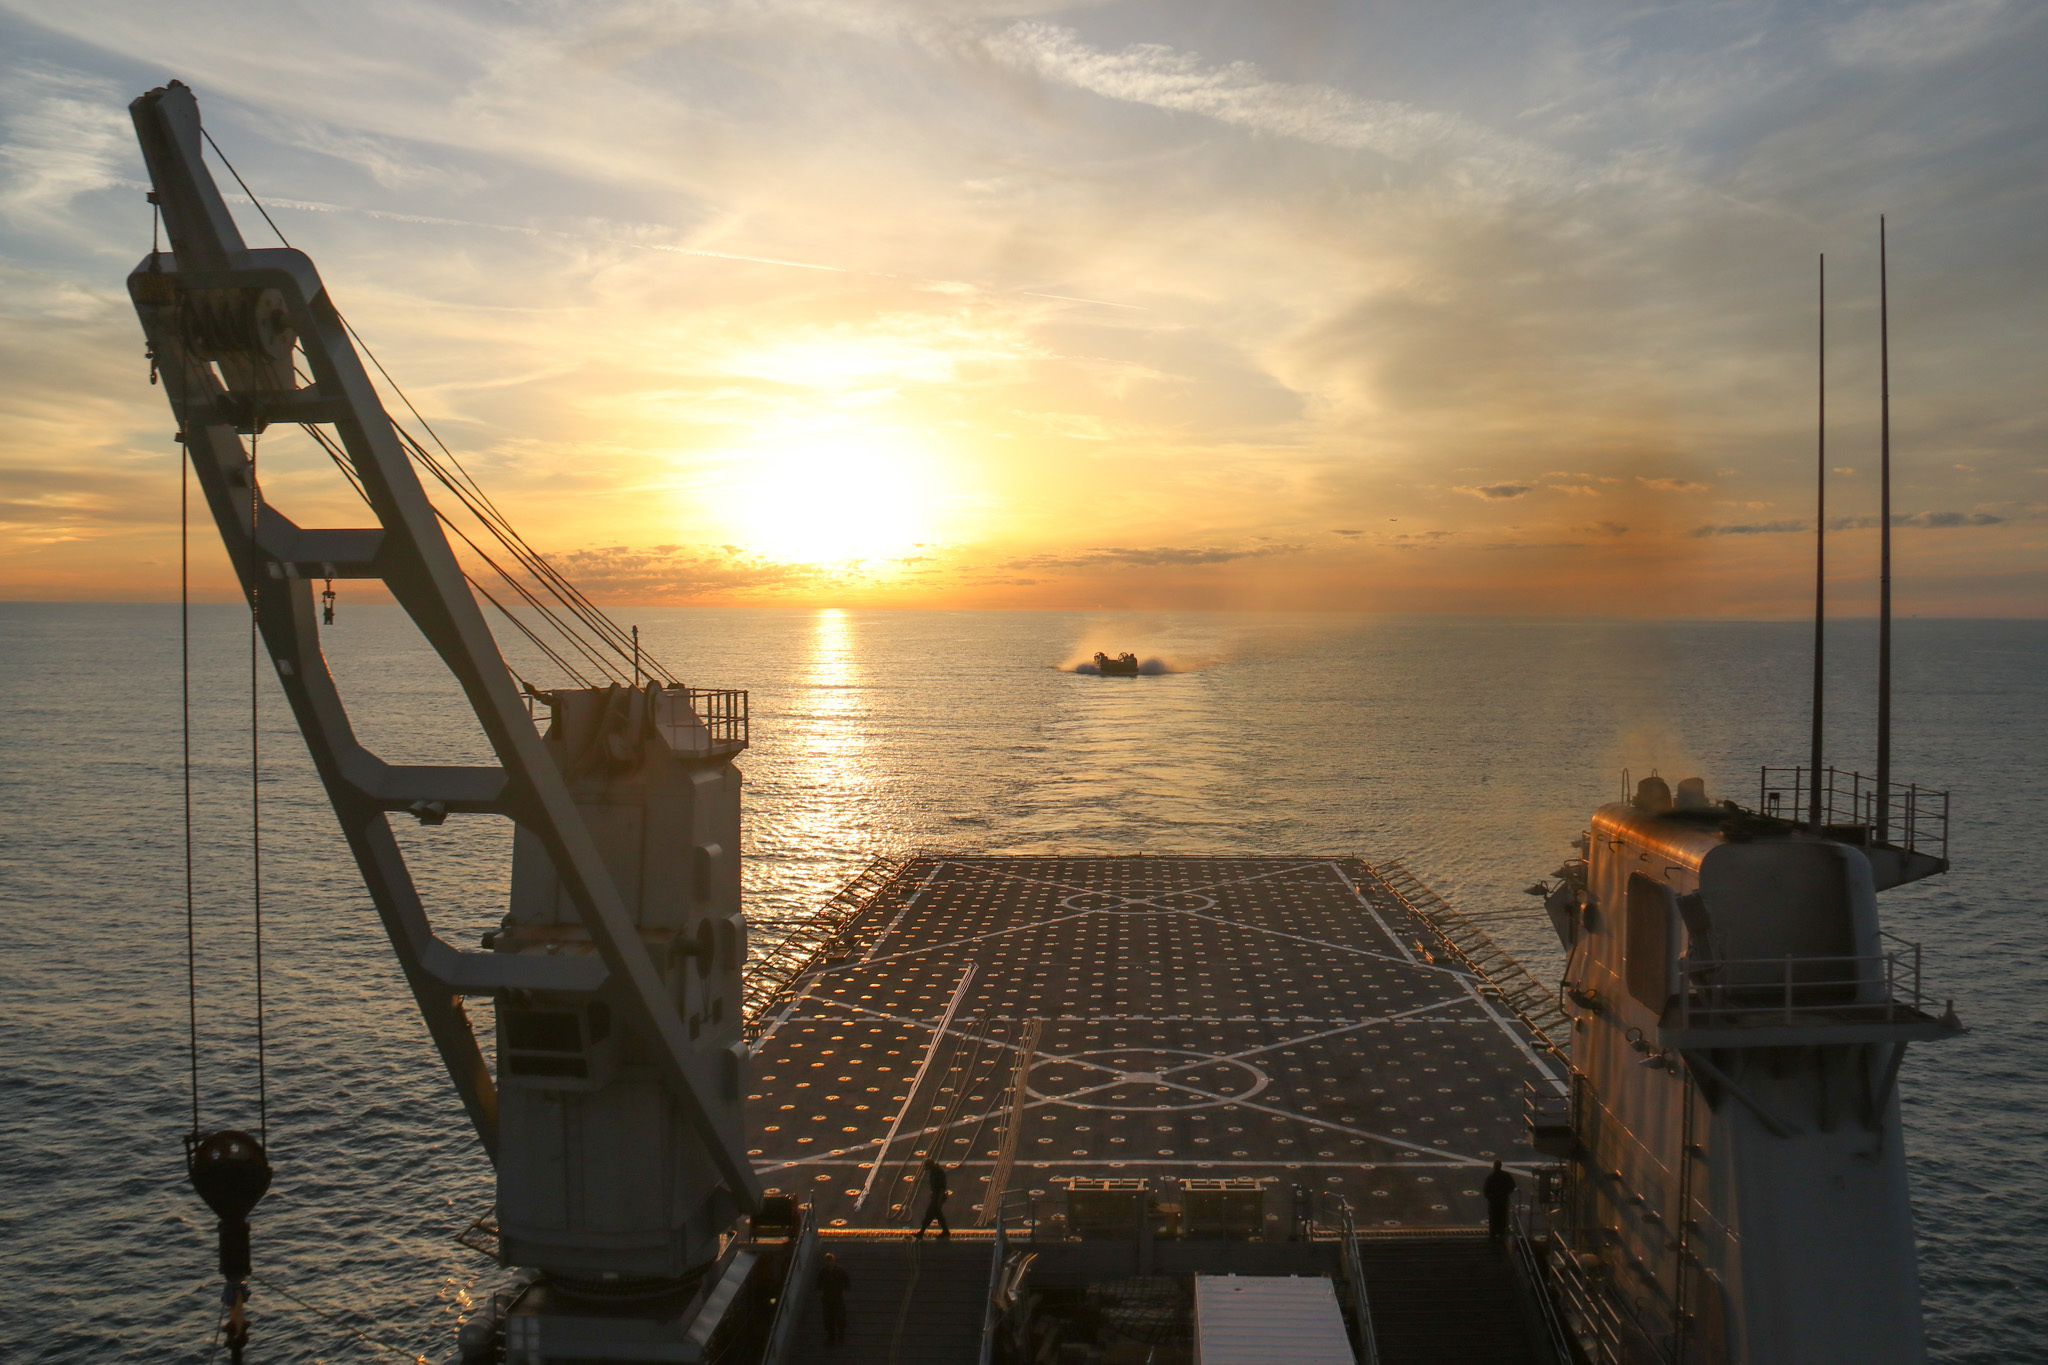 PHOTO: A landing craft air cushion (LCAC) approaches the well deck of the Harpers Ferry-Class dock landing ship USS Carter Hall, Feb. 7, 2023, in the Atlantic Ocean, during recovery efforts of the high altitude surveillance balloon brought down on Feb. 4.